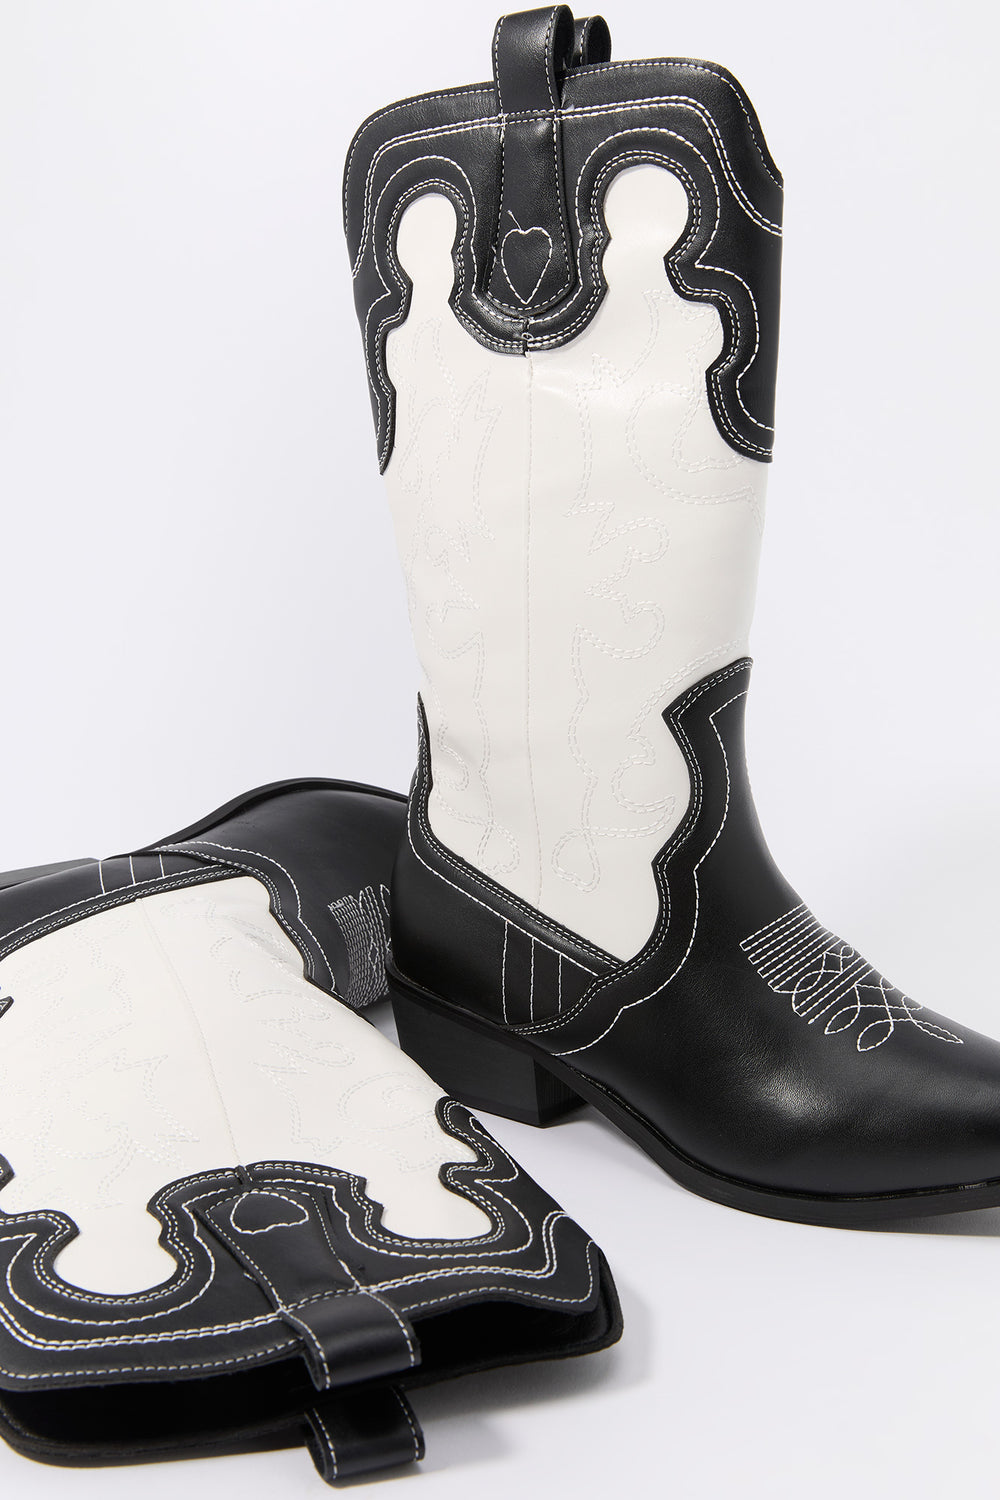 Black and White Cowboy Boot Black and White Cowboy Boot 4